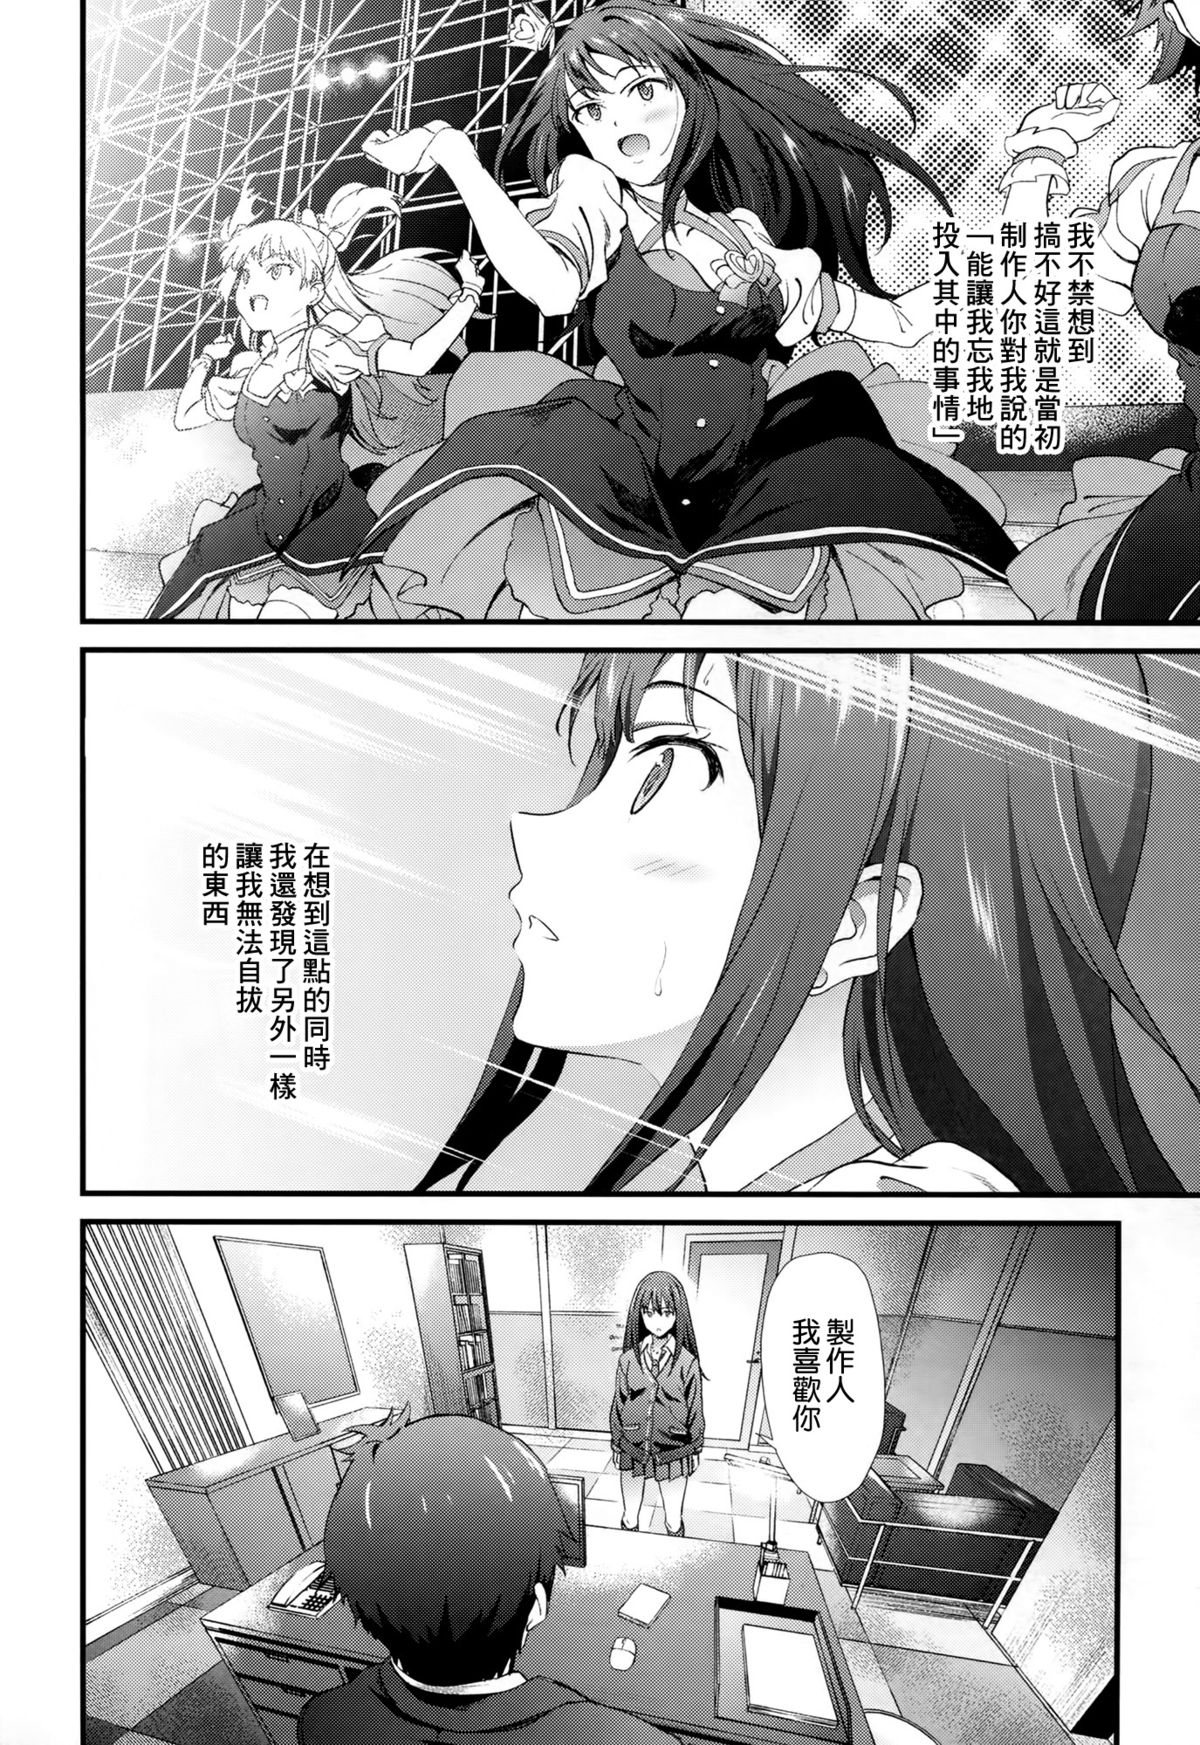 (C88) [EXTENDED PART (YOSHIKI)] SBRN (THE IDOLM@STER CINDERELLA GIRLS) [Chinese] [空気系☆漢化] page 4 full